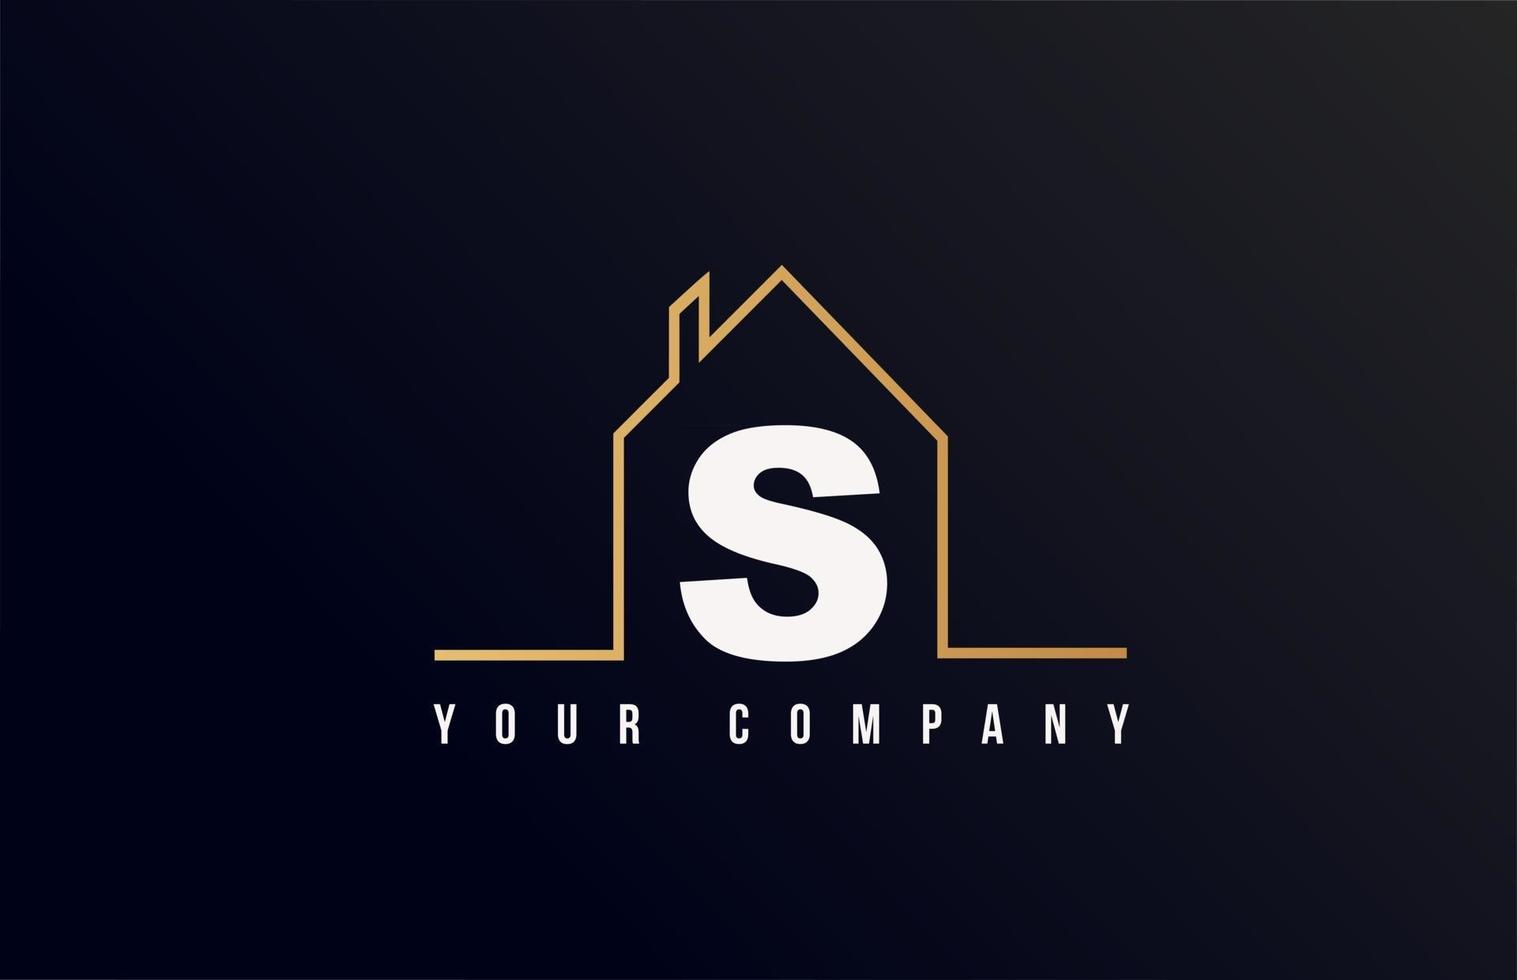 S house alphabet letter icon logo design. House real estate for company and business identity with line contour of a home vector